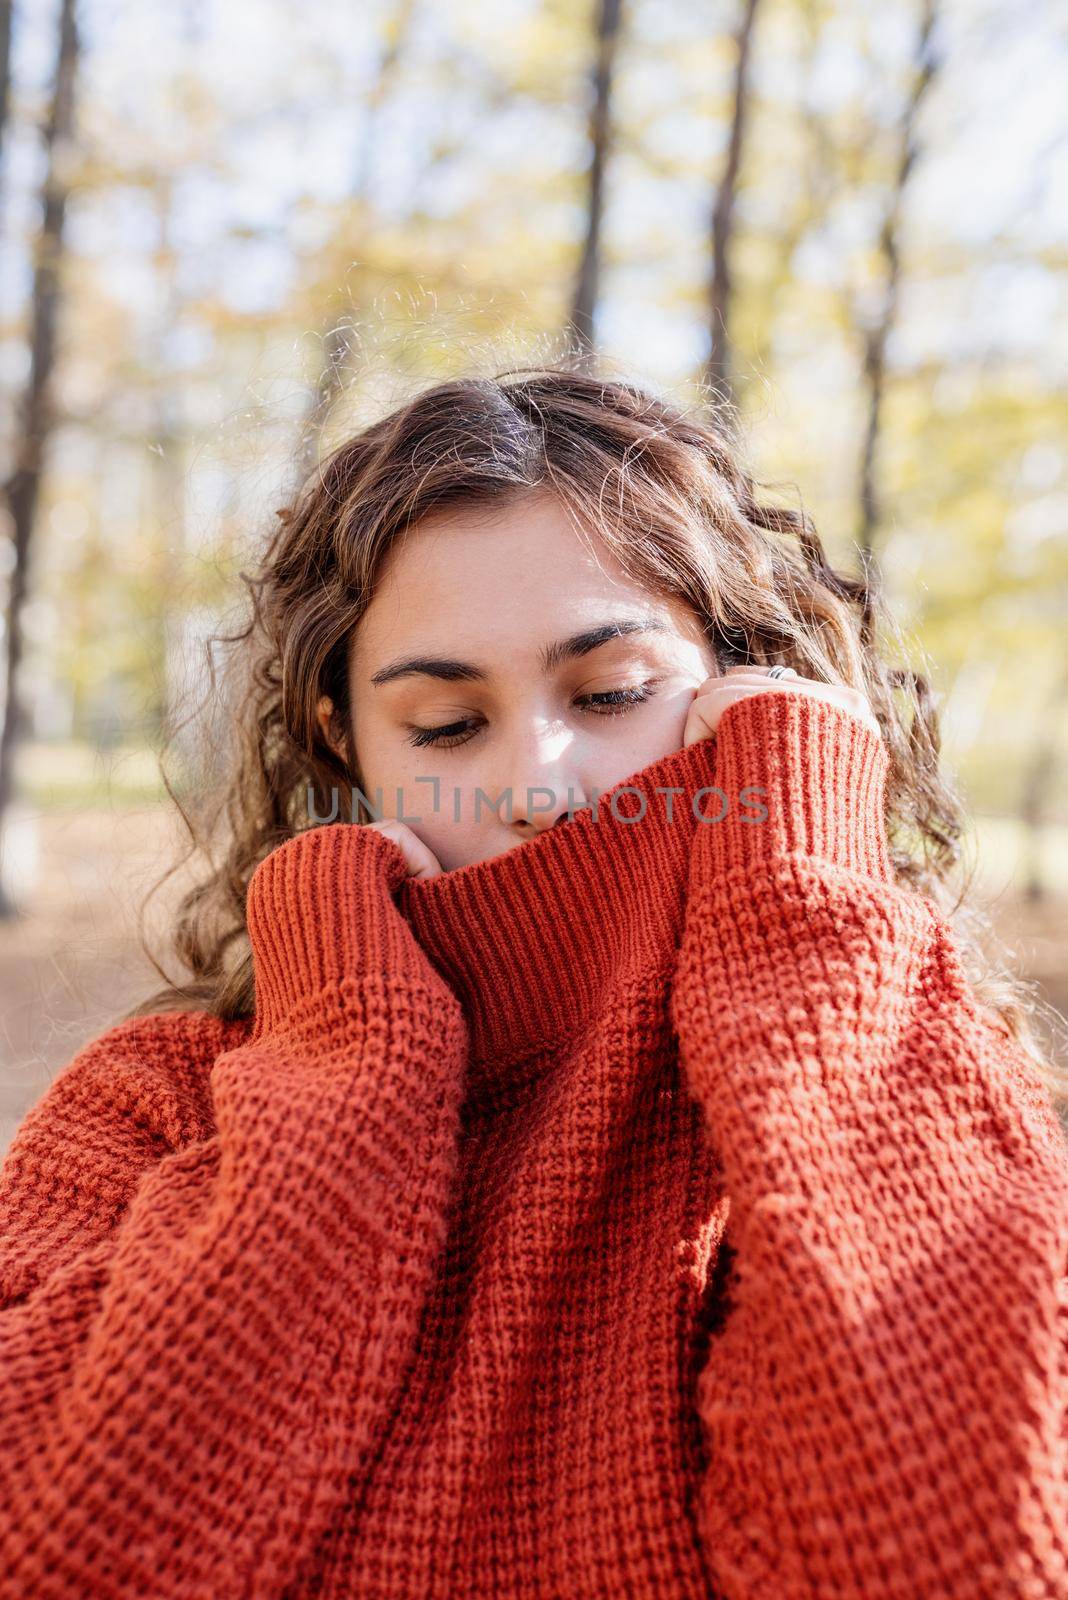 Autumn nature. Portrait of young happy woman in warm sweater in autumn forest